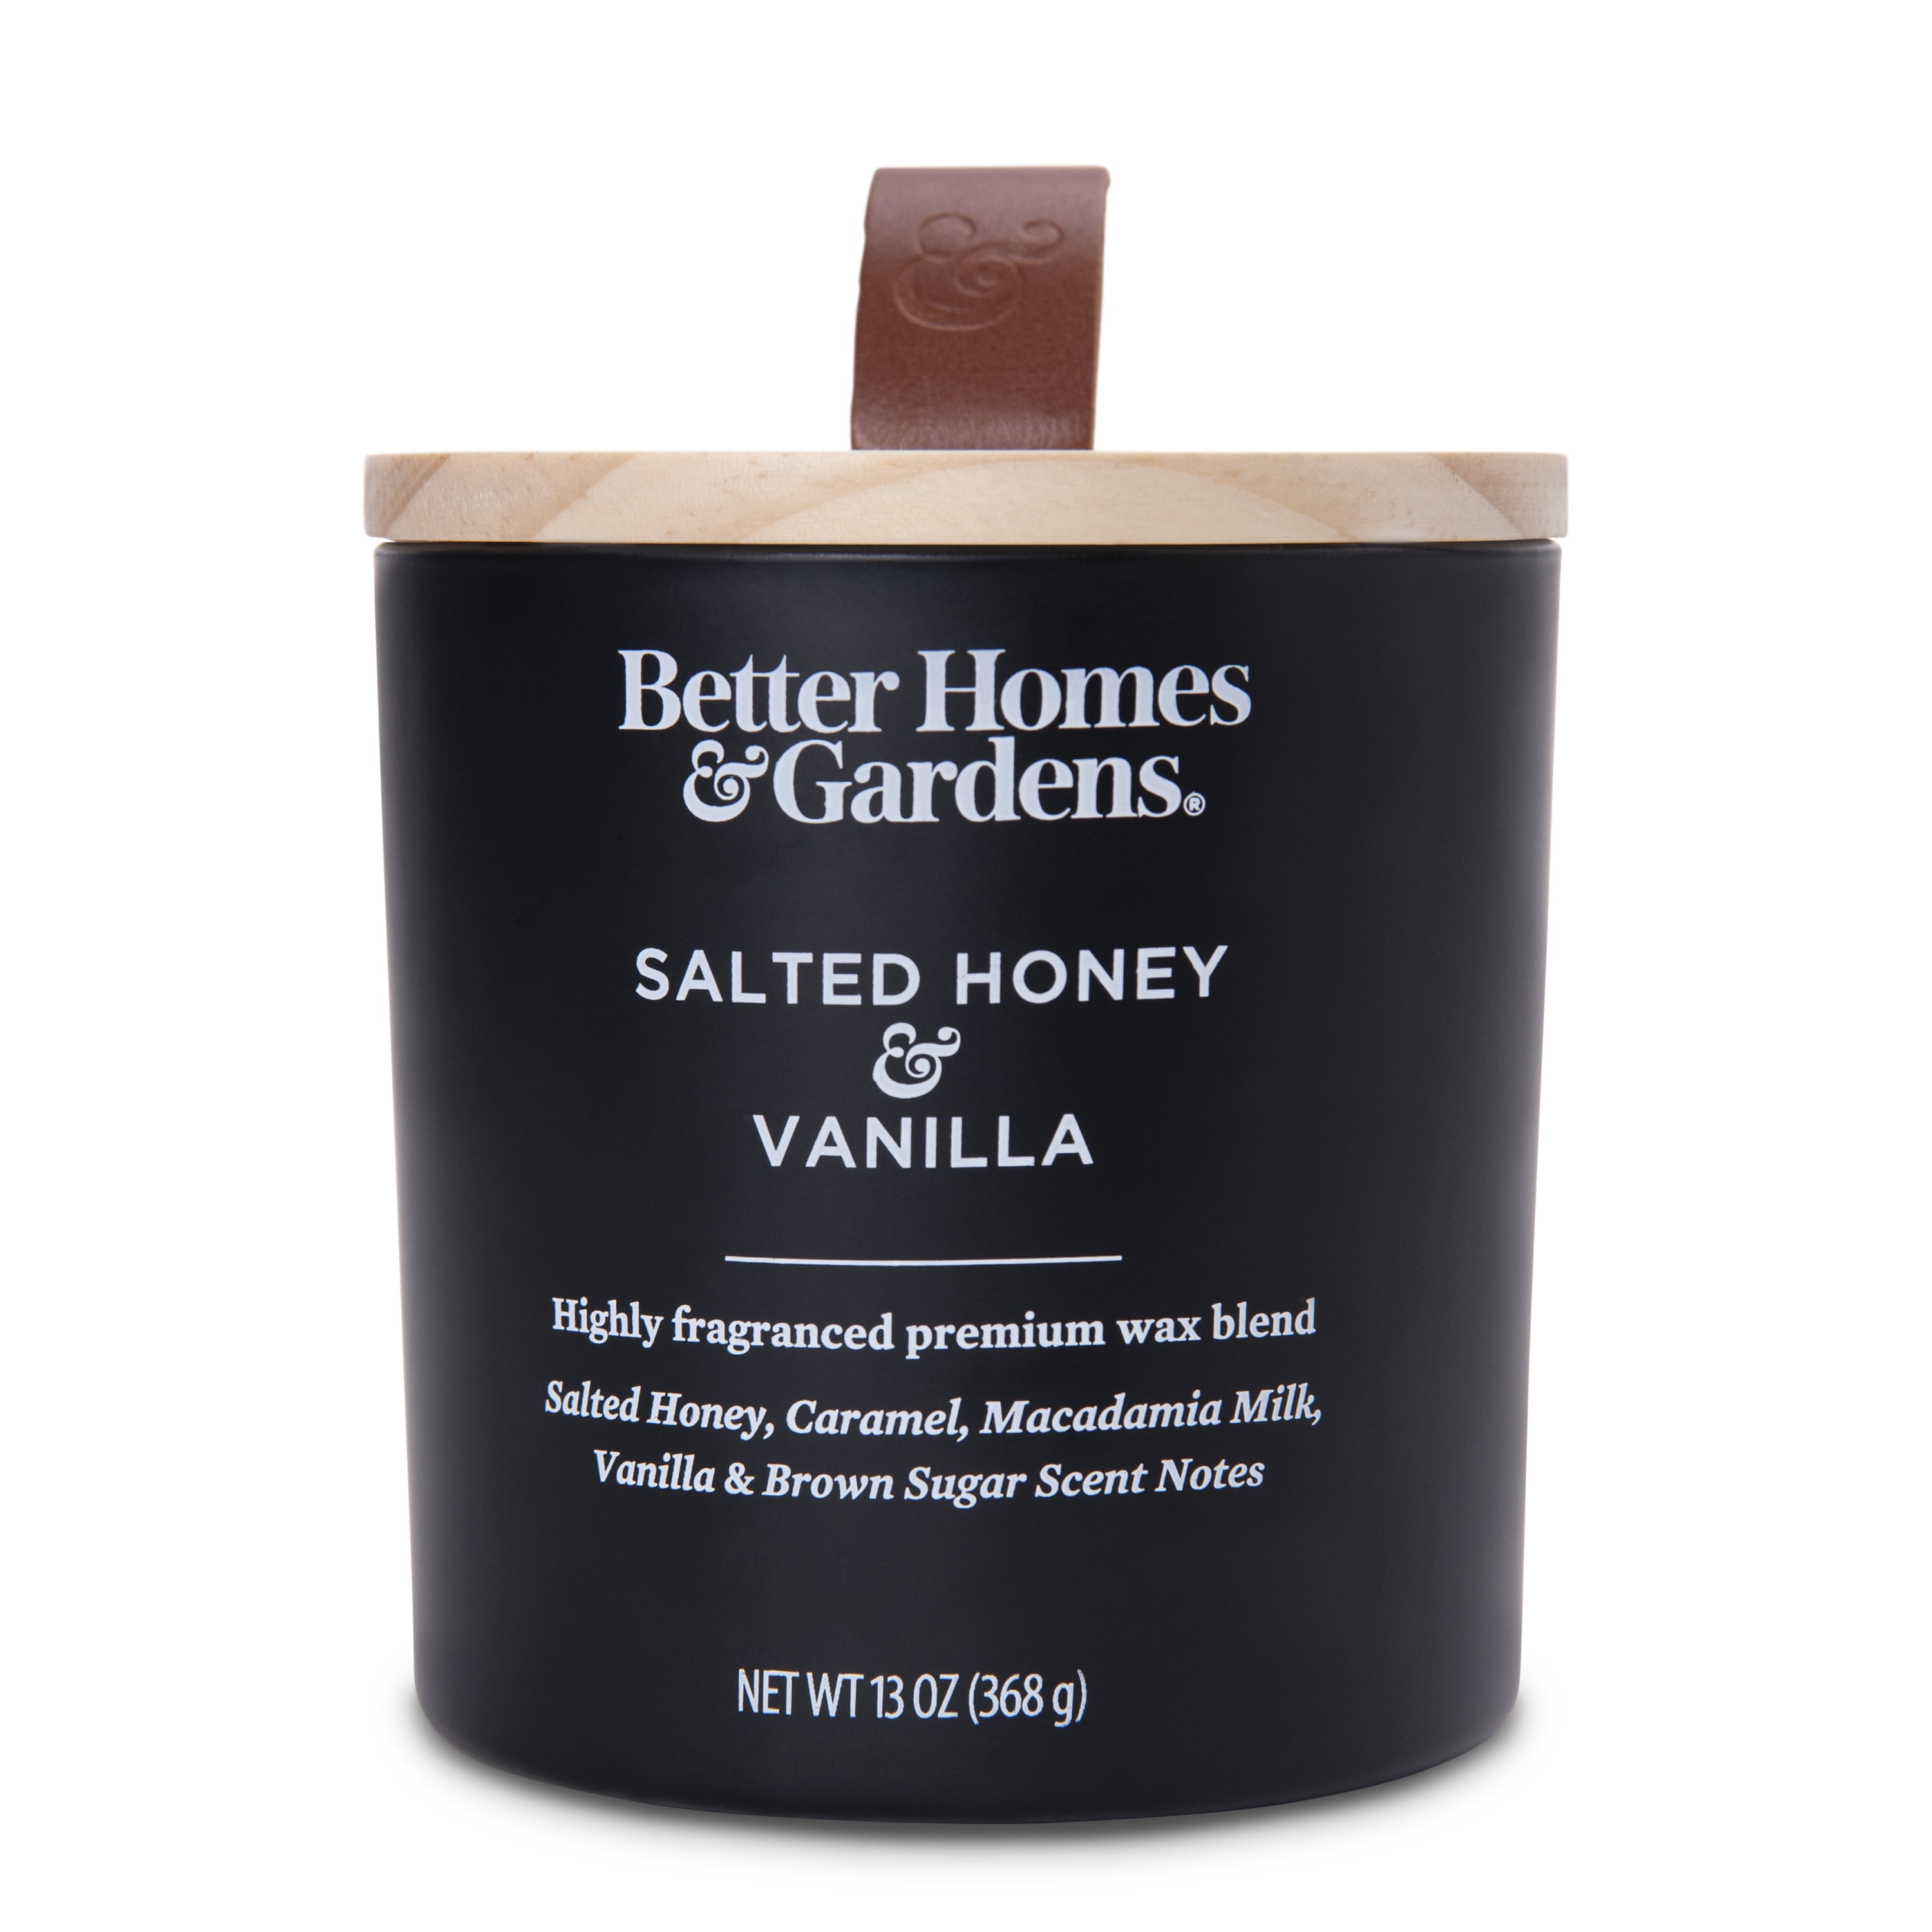 Better Homes & Gardens 13oz Salted Honey & Vanilla Scented Wooden Wick Candle